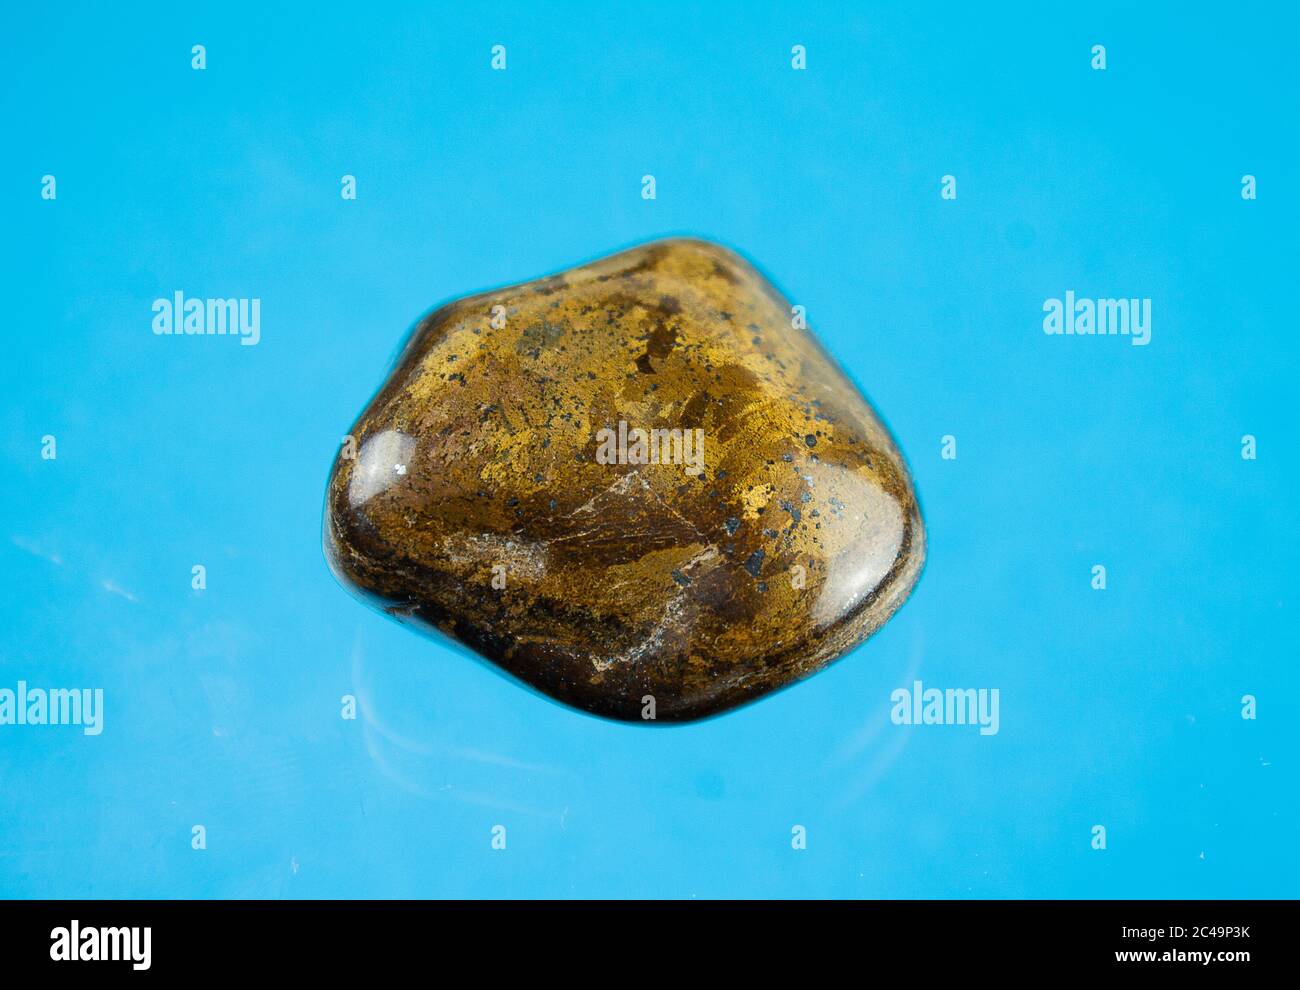 Bronzite High Resolution Stock Photography and Images - Alamy